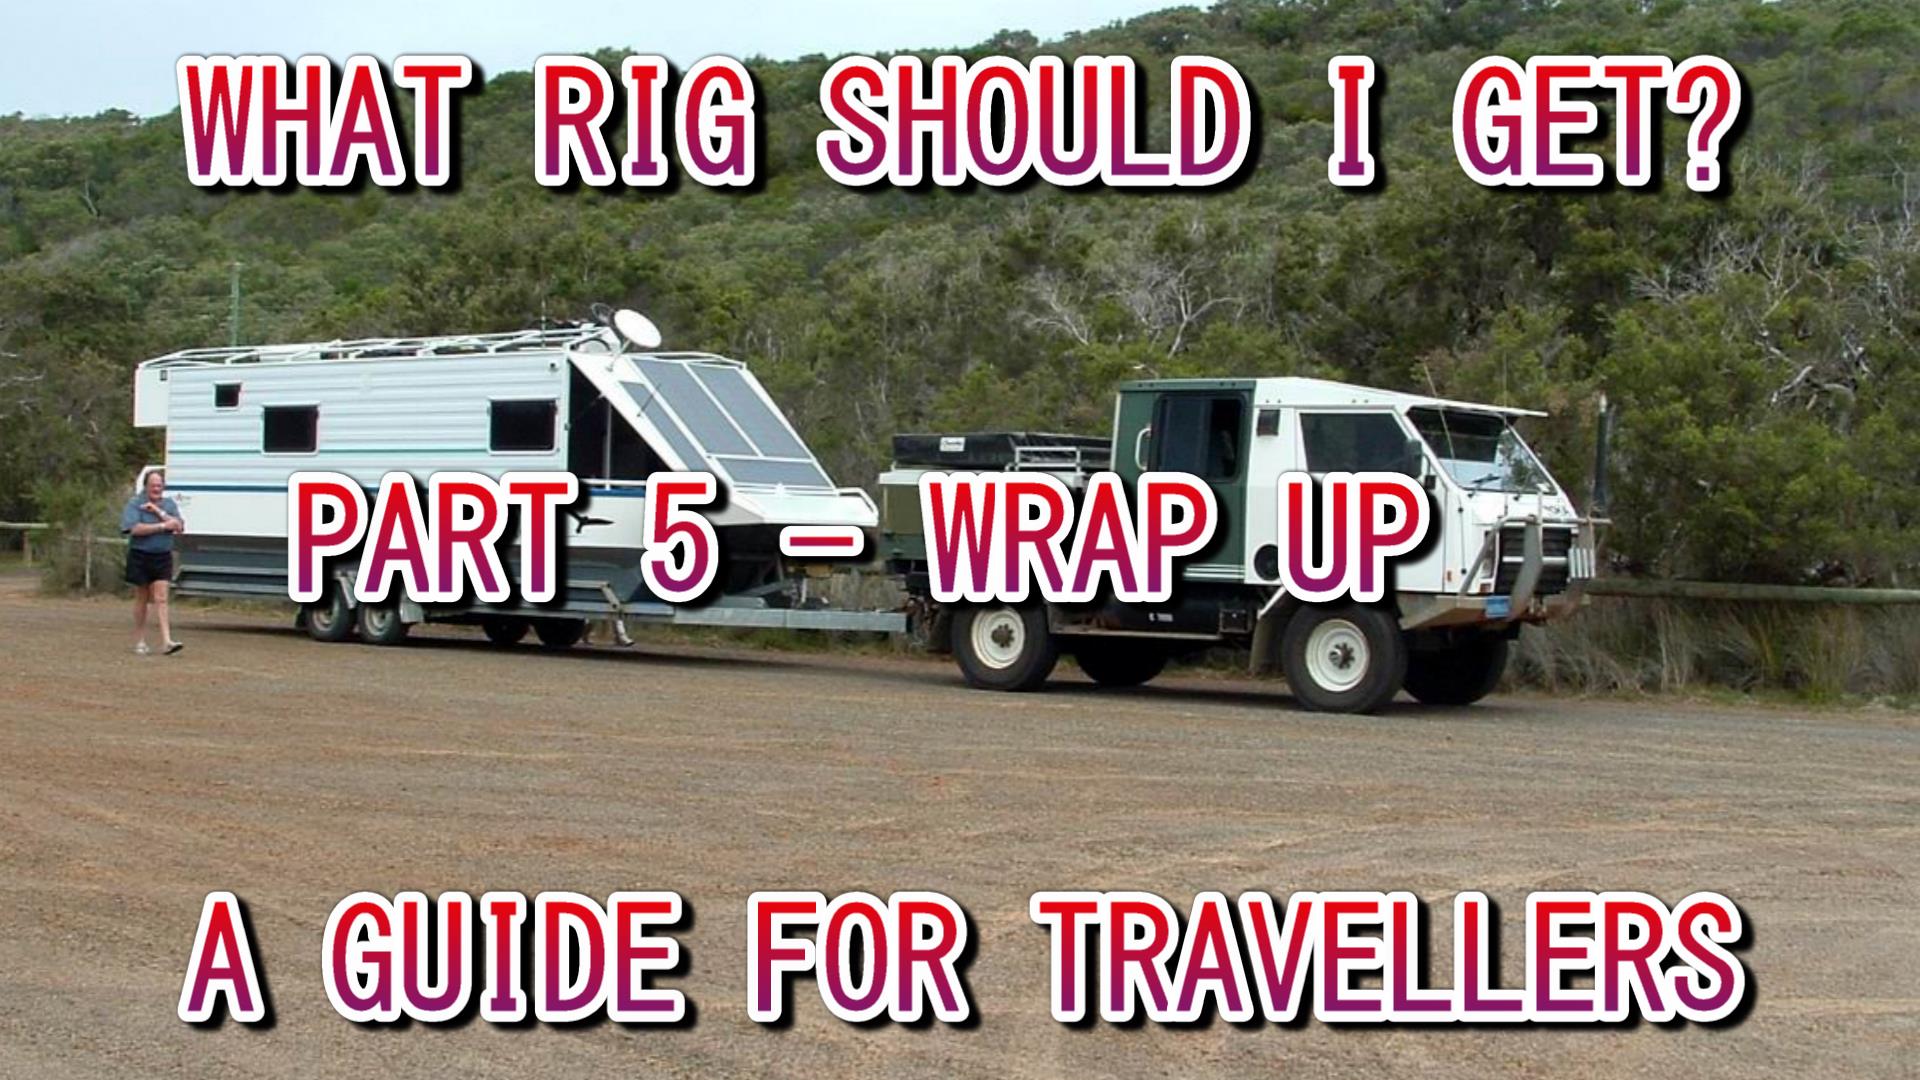 What rig should I get - Wrap Up